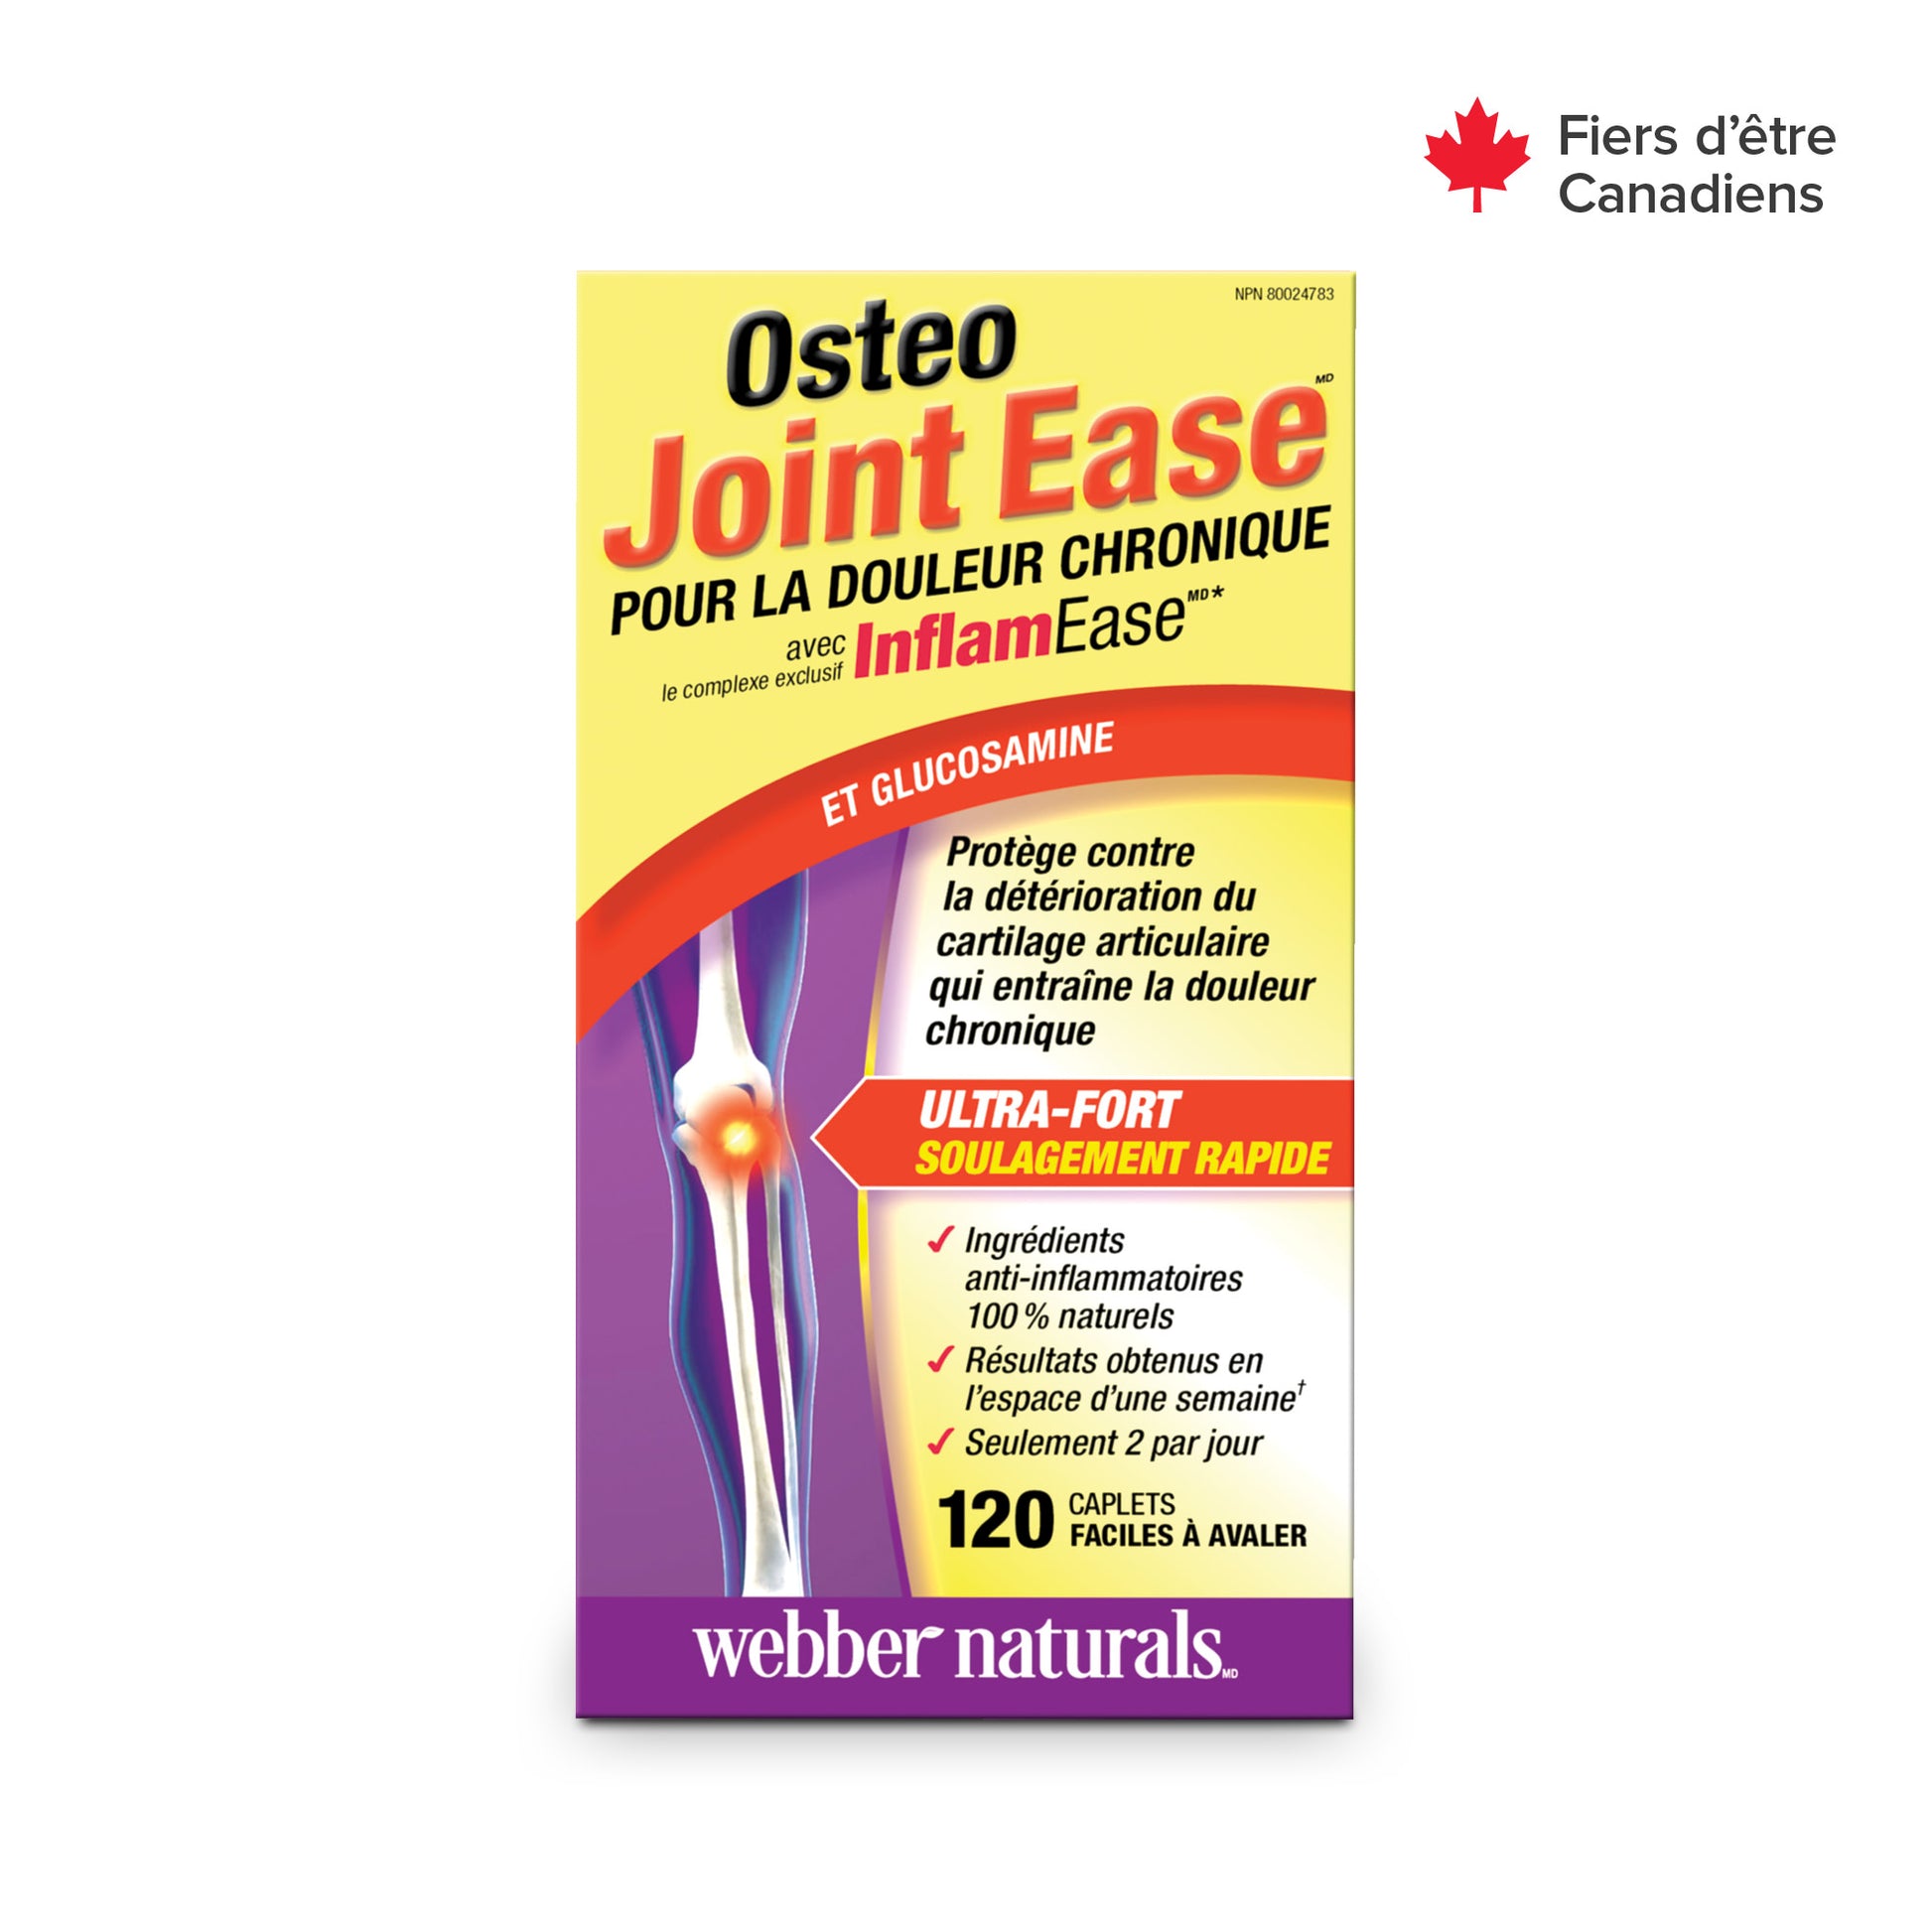 Osteo Joint Ease® with InflamEase® and Glucosamine for Webber Naturals|v|hi-res|WN3374